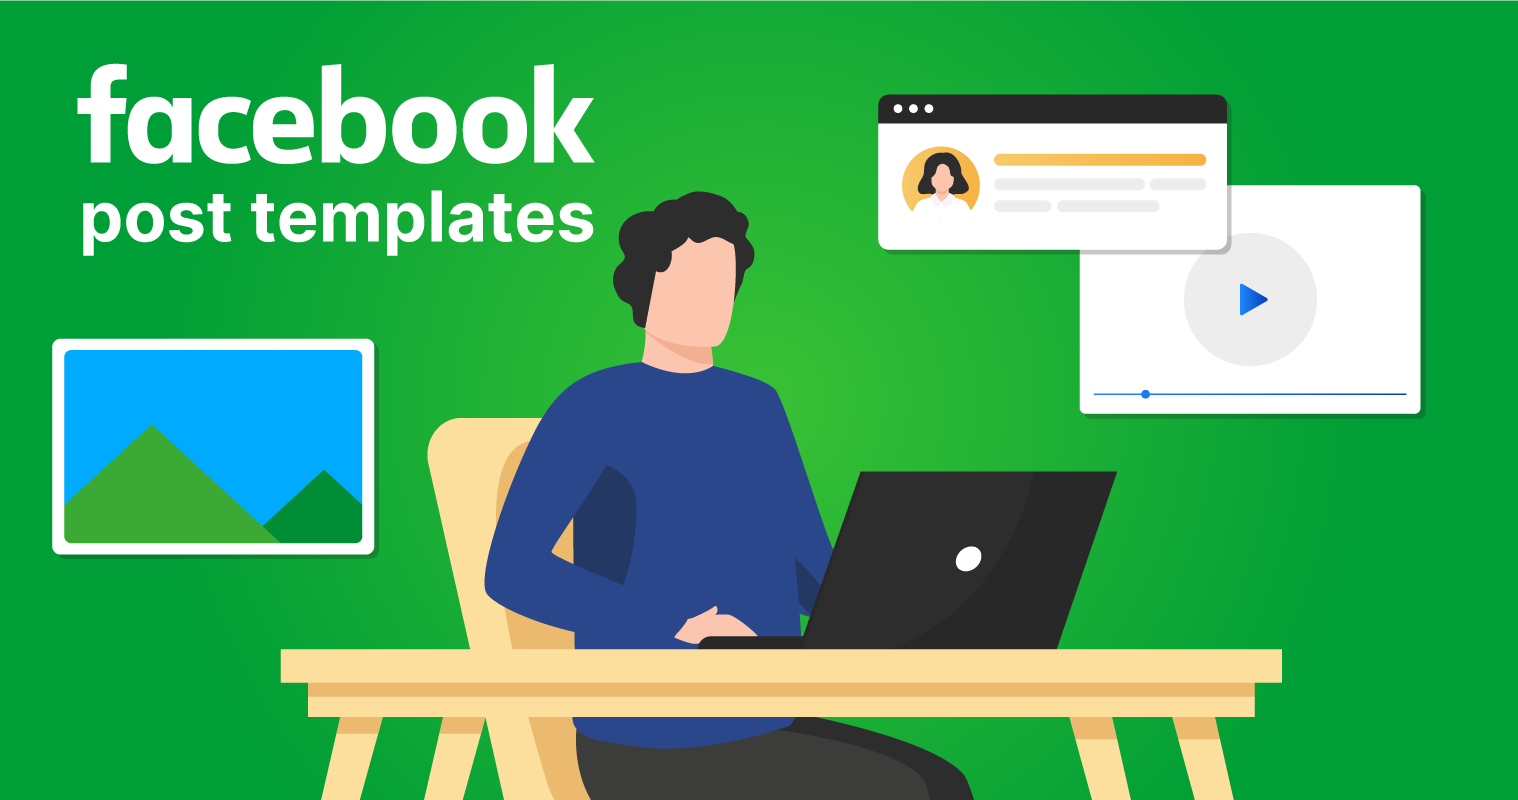 42 Free Facebook Post Templates that'll Save You HOURS